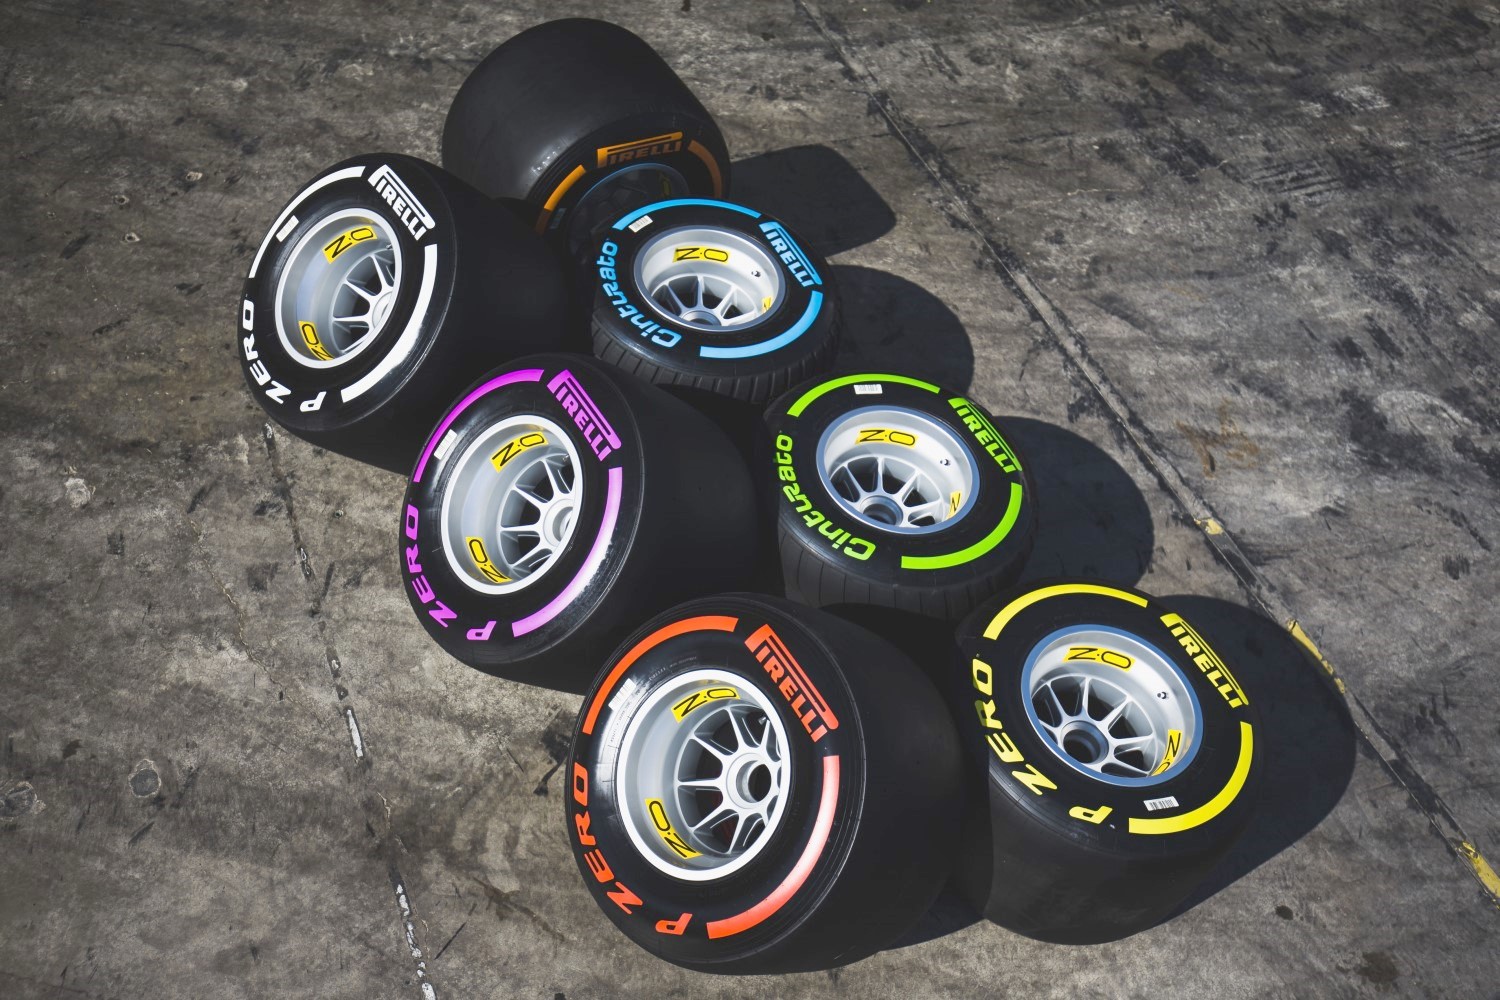 Pirelli convinced F1 to go with wider tires and it has ruined the racing. Fans care more about driver skill and passing than breaking lap records in qualifying